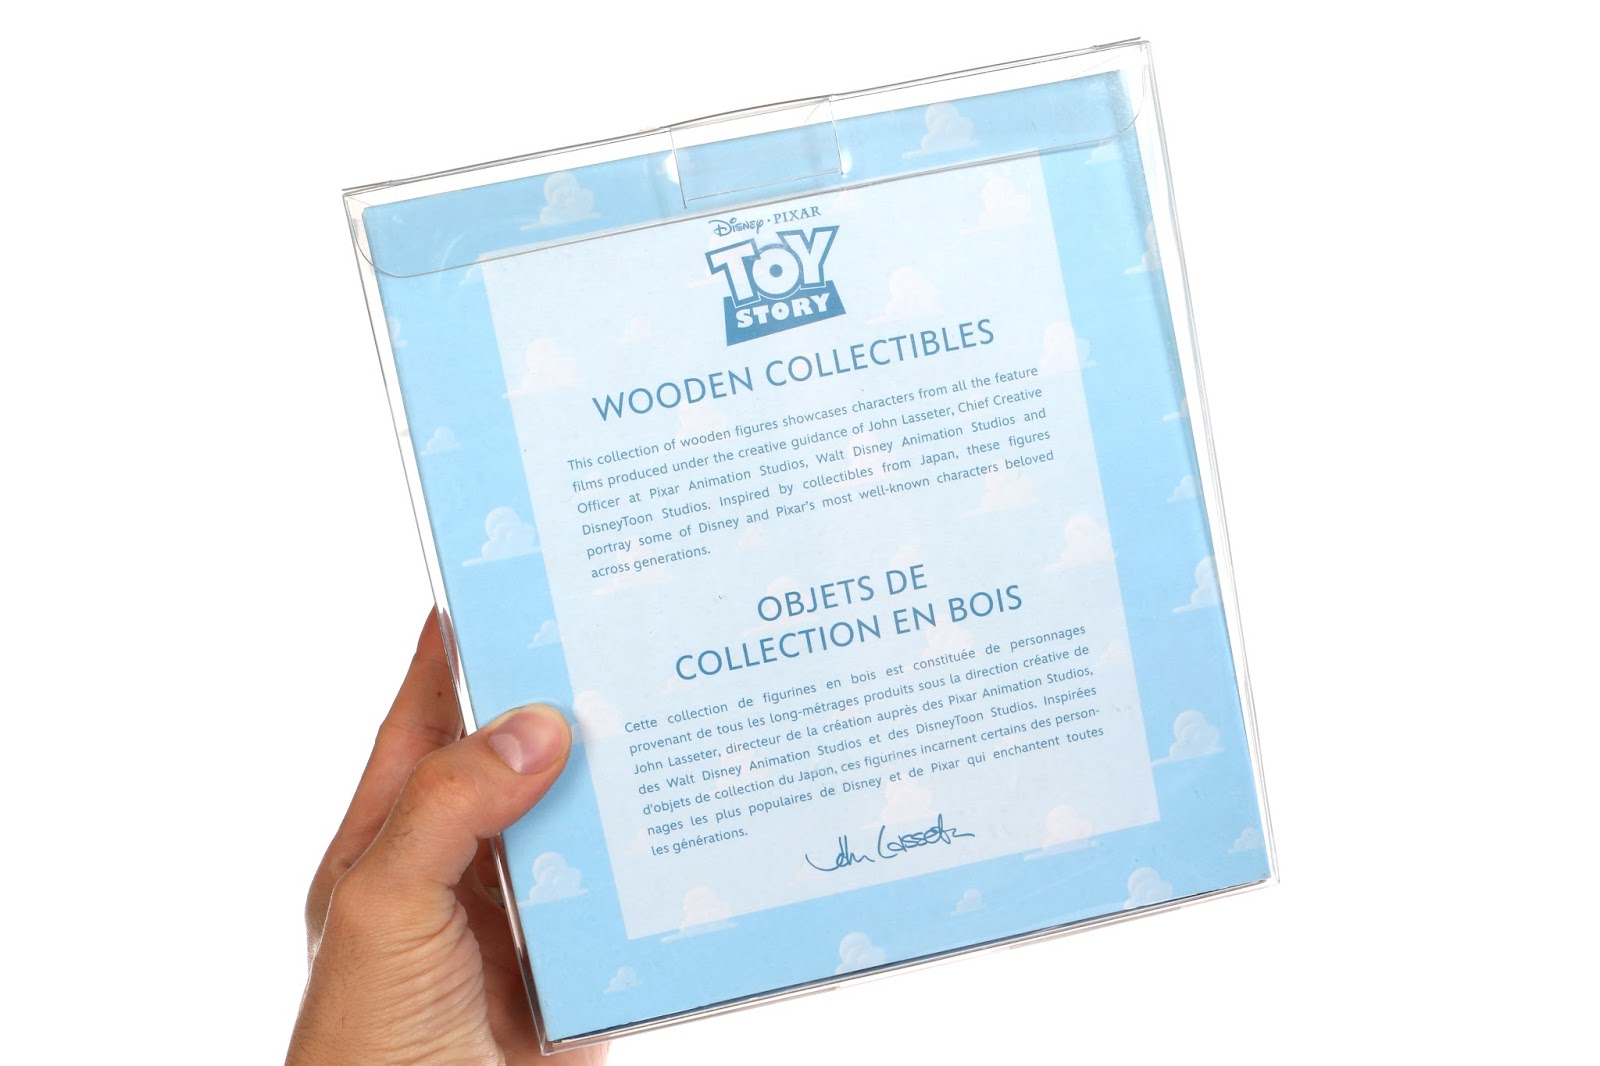 Toy Story D23 Expo 2017 Wooden Collectibles 